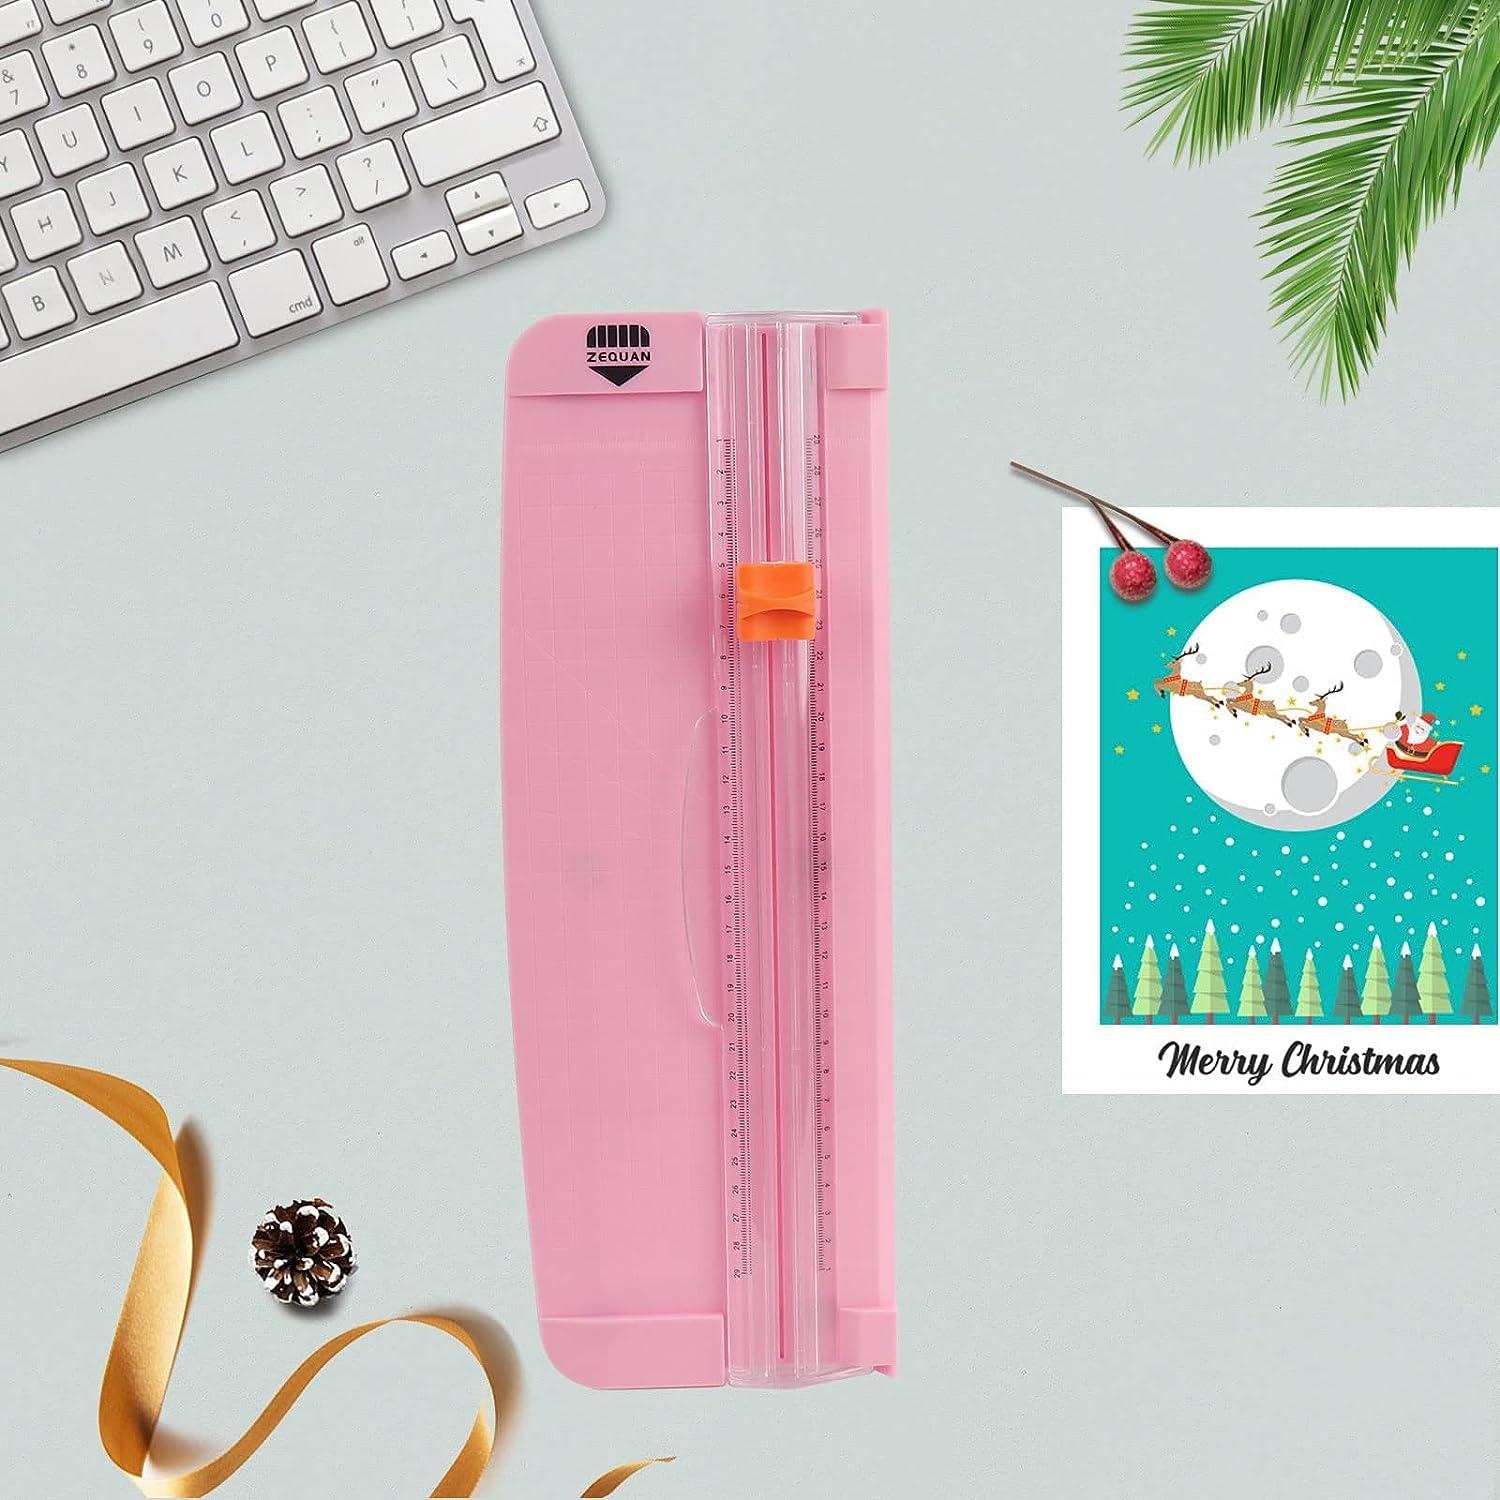 OIAGLH 5pcs Multifunctional Album Handheld DIY Craft Greeting Cards  Portable Angled For Scrapbooking Home School Paper Cutter Pen 